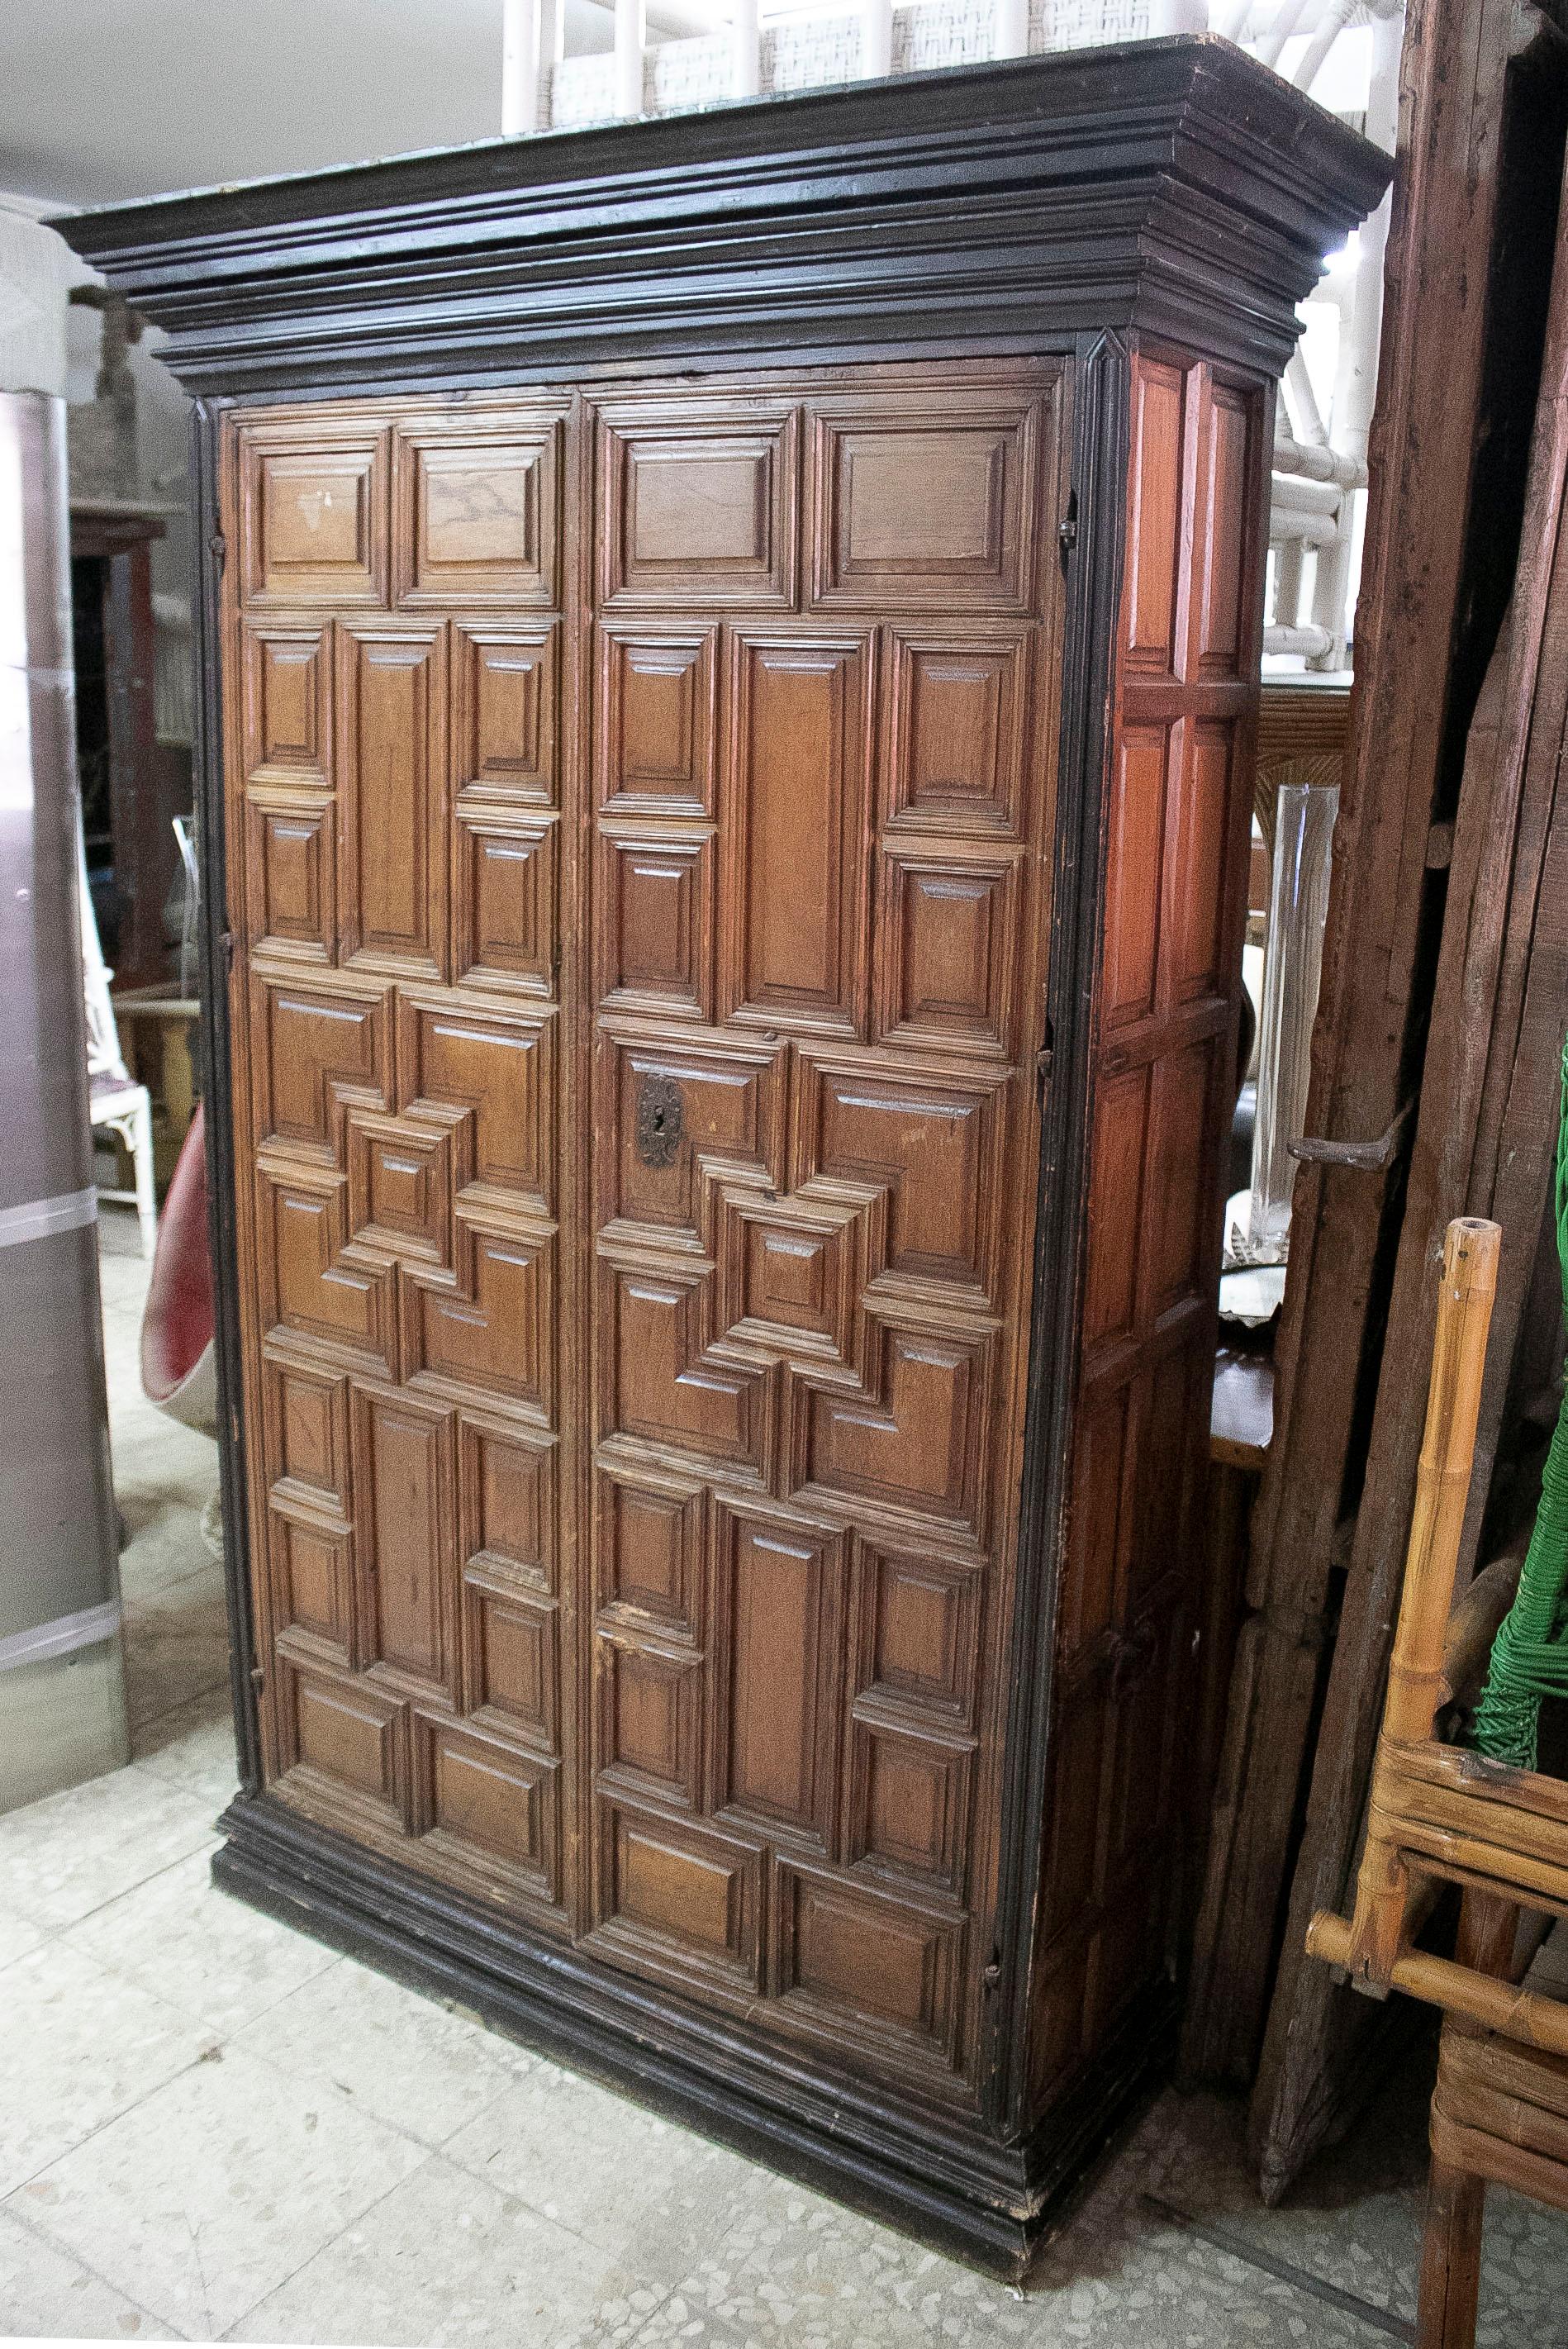 18th century Spanish 2-door cupboard cabinet with raised panels ornamentation and a 3-drawer and 5-shelf interior.